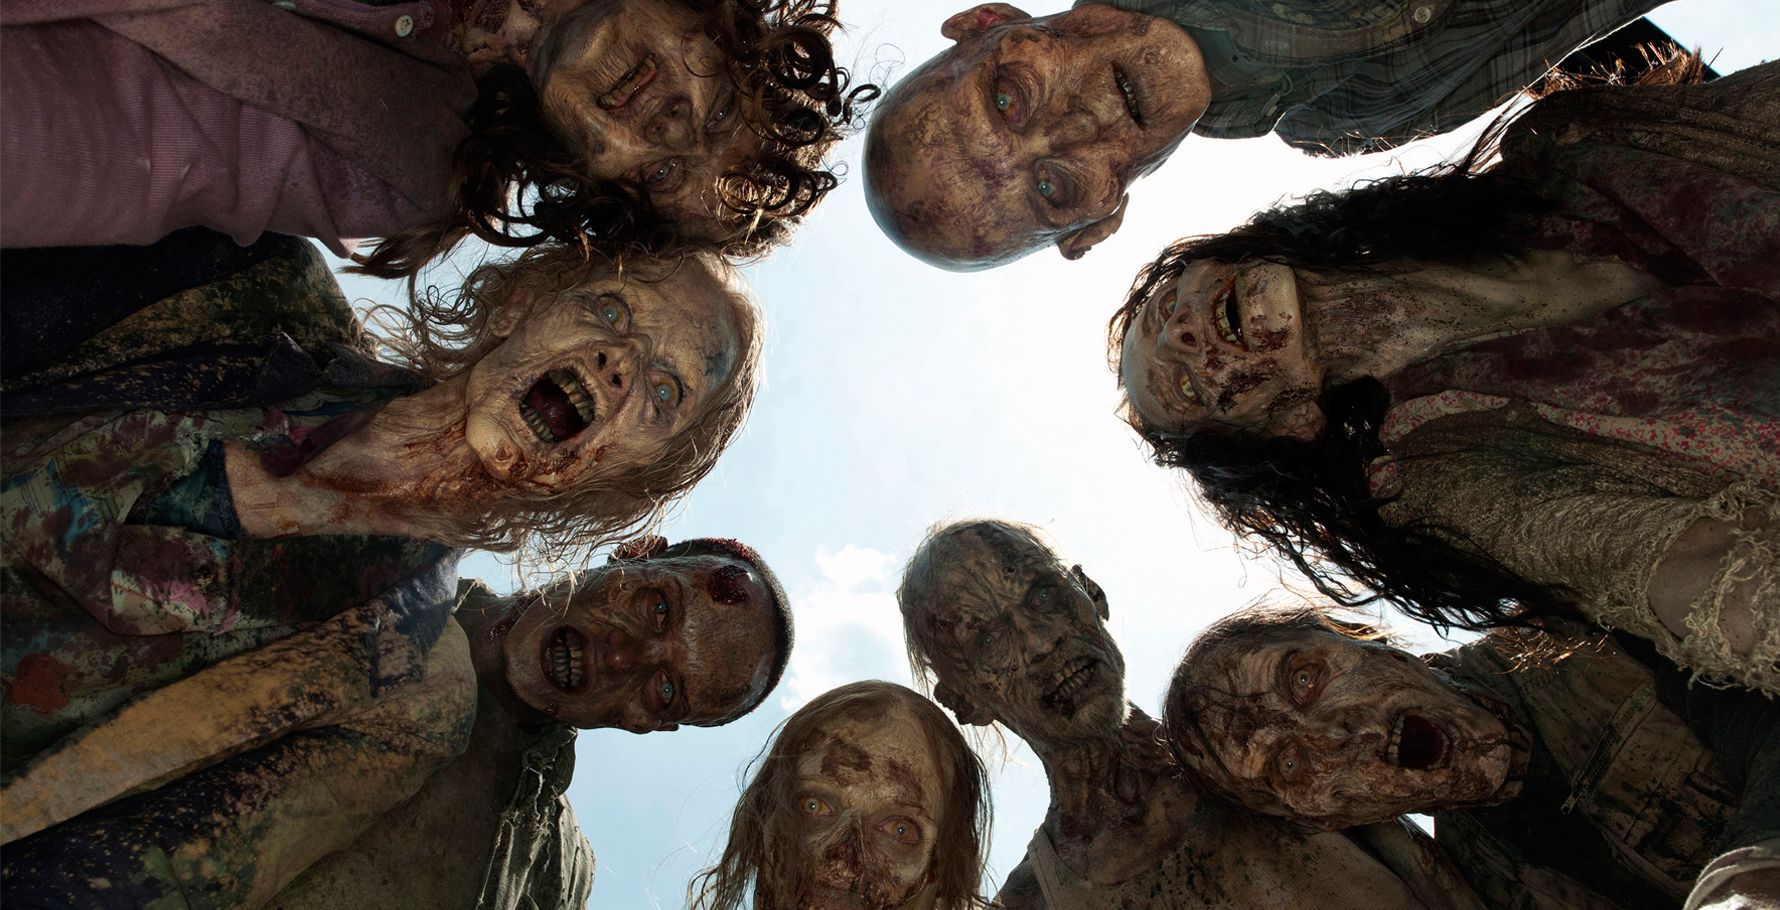 10 Things We Know So Far About Zombies According To TWD